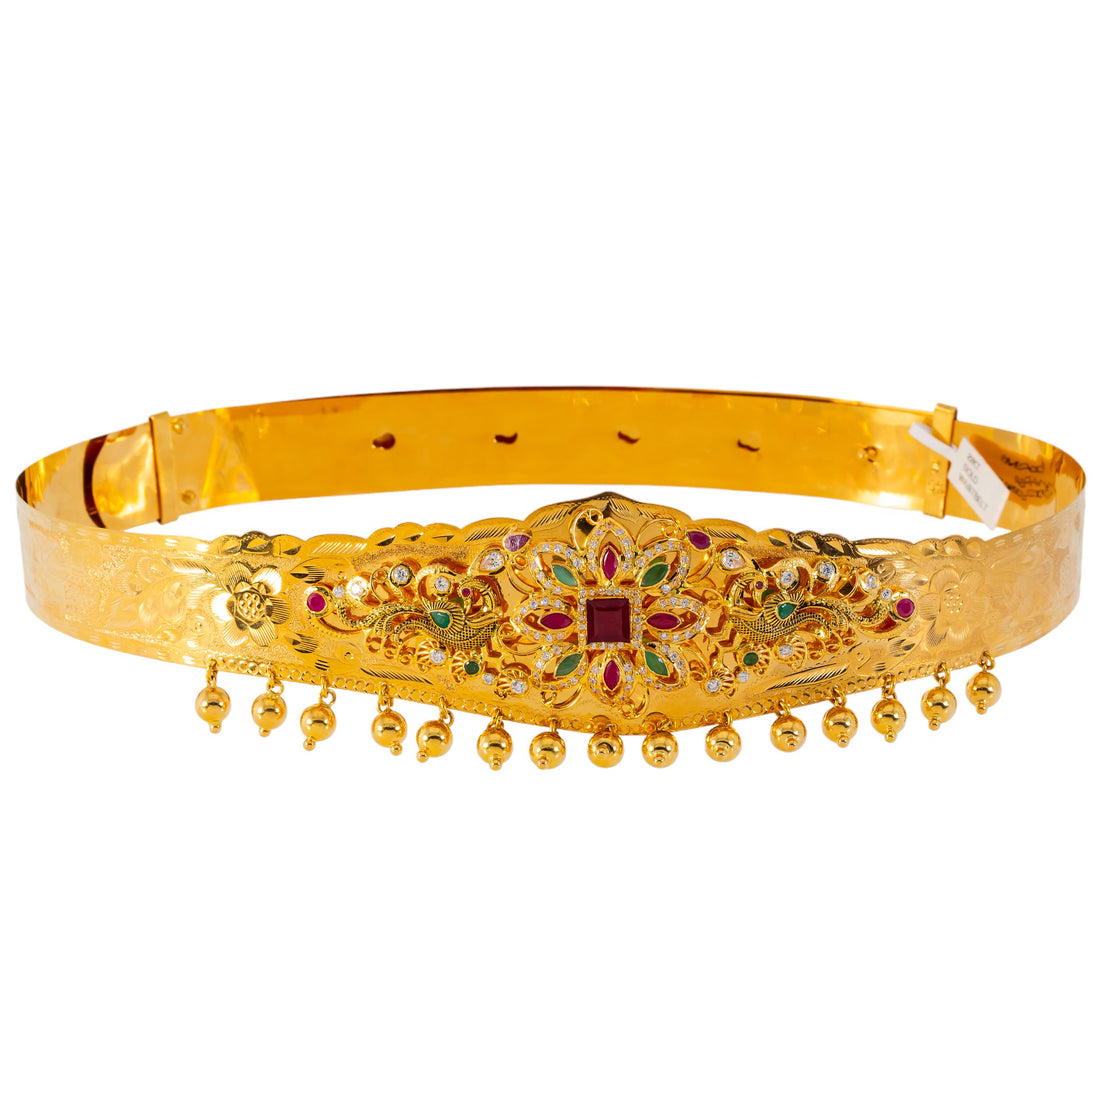 Trending gold vaddanam designs with weight // gold waist belts